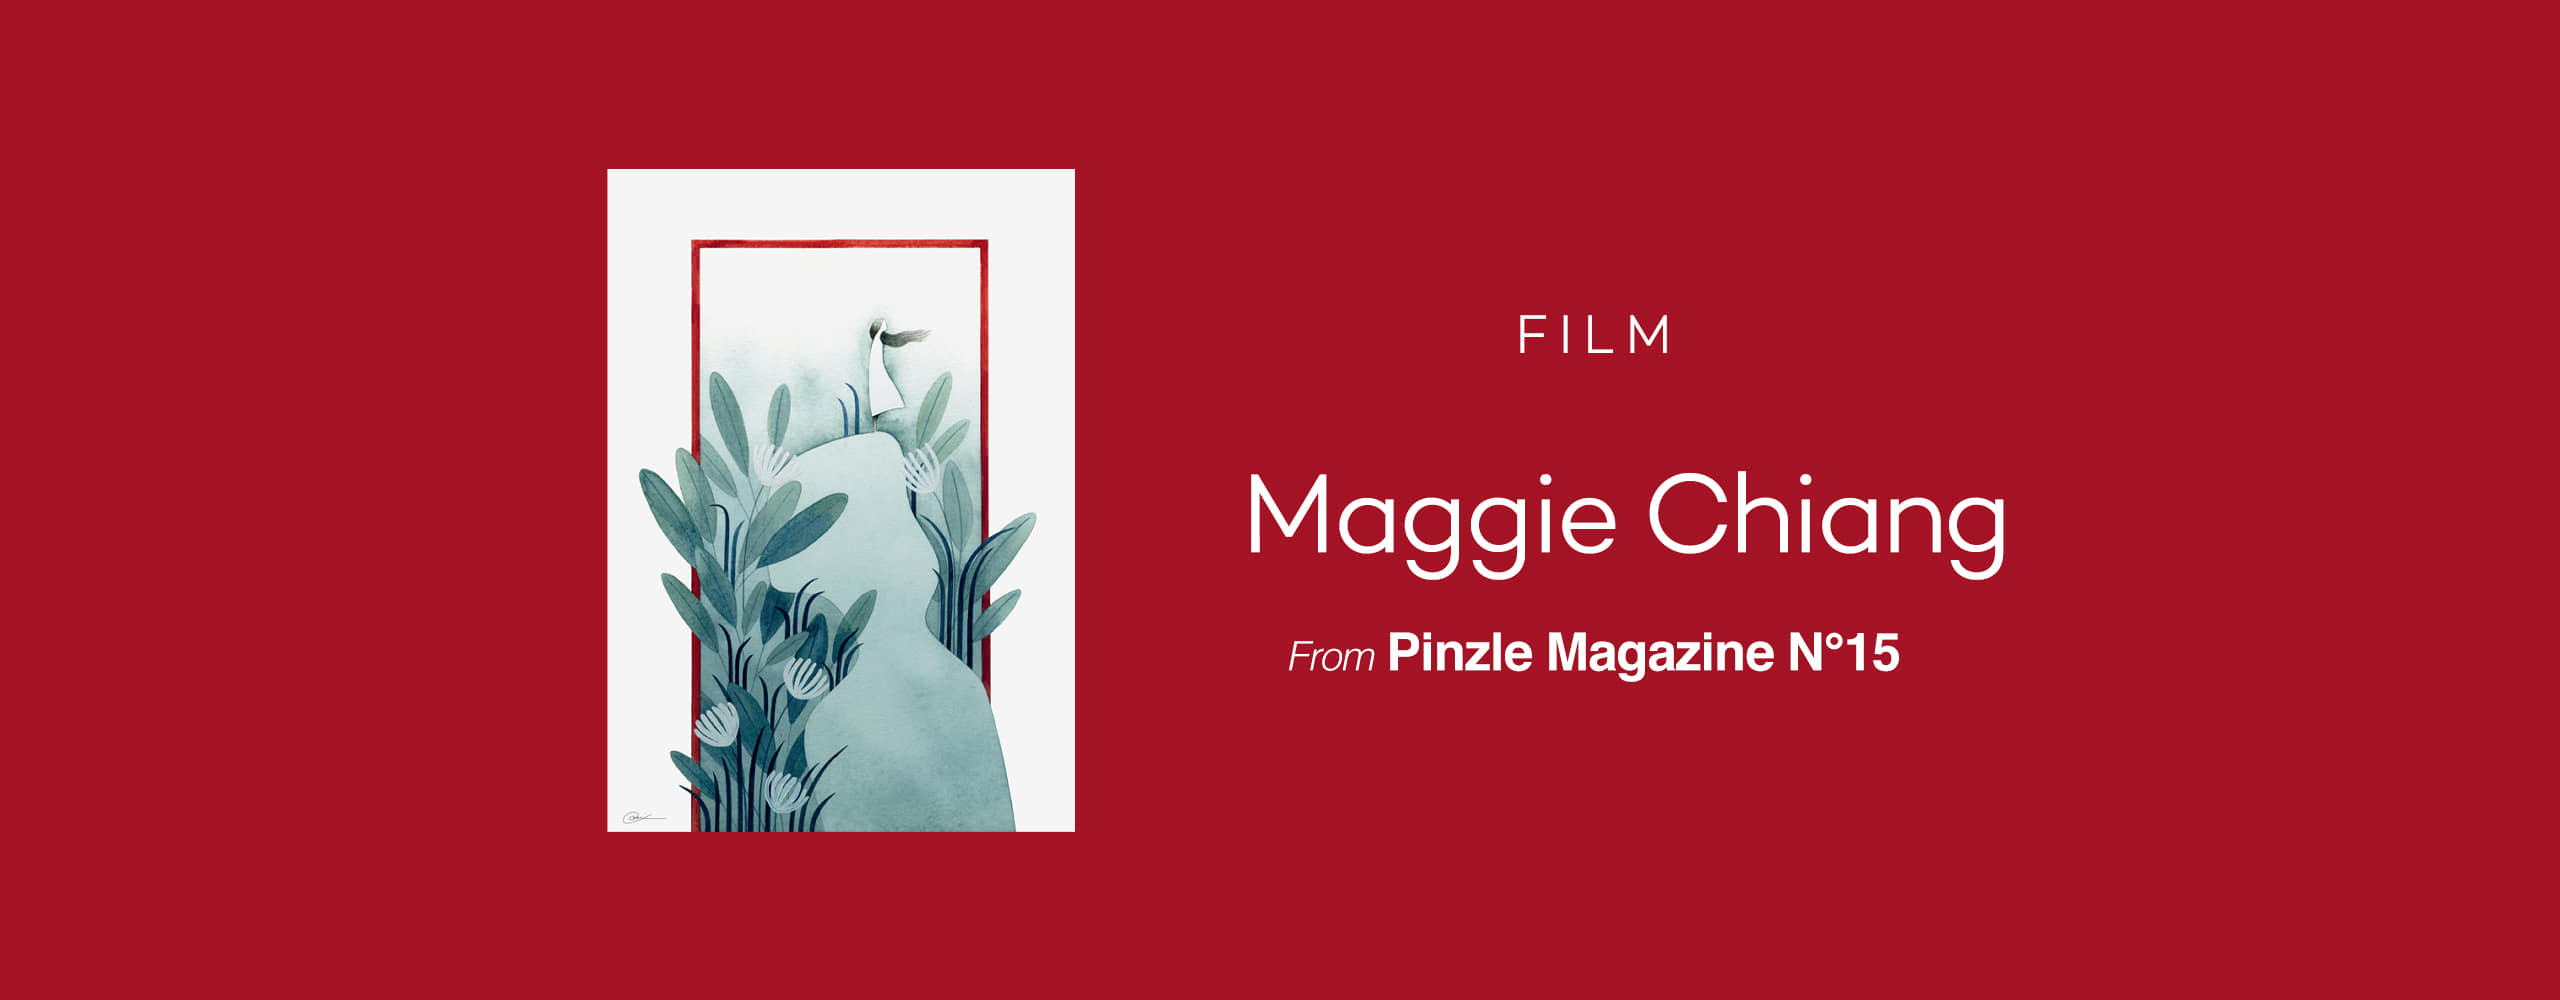 [FILM] Maggie Chiang